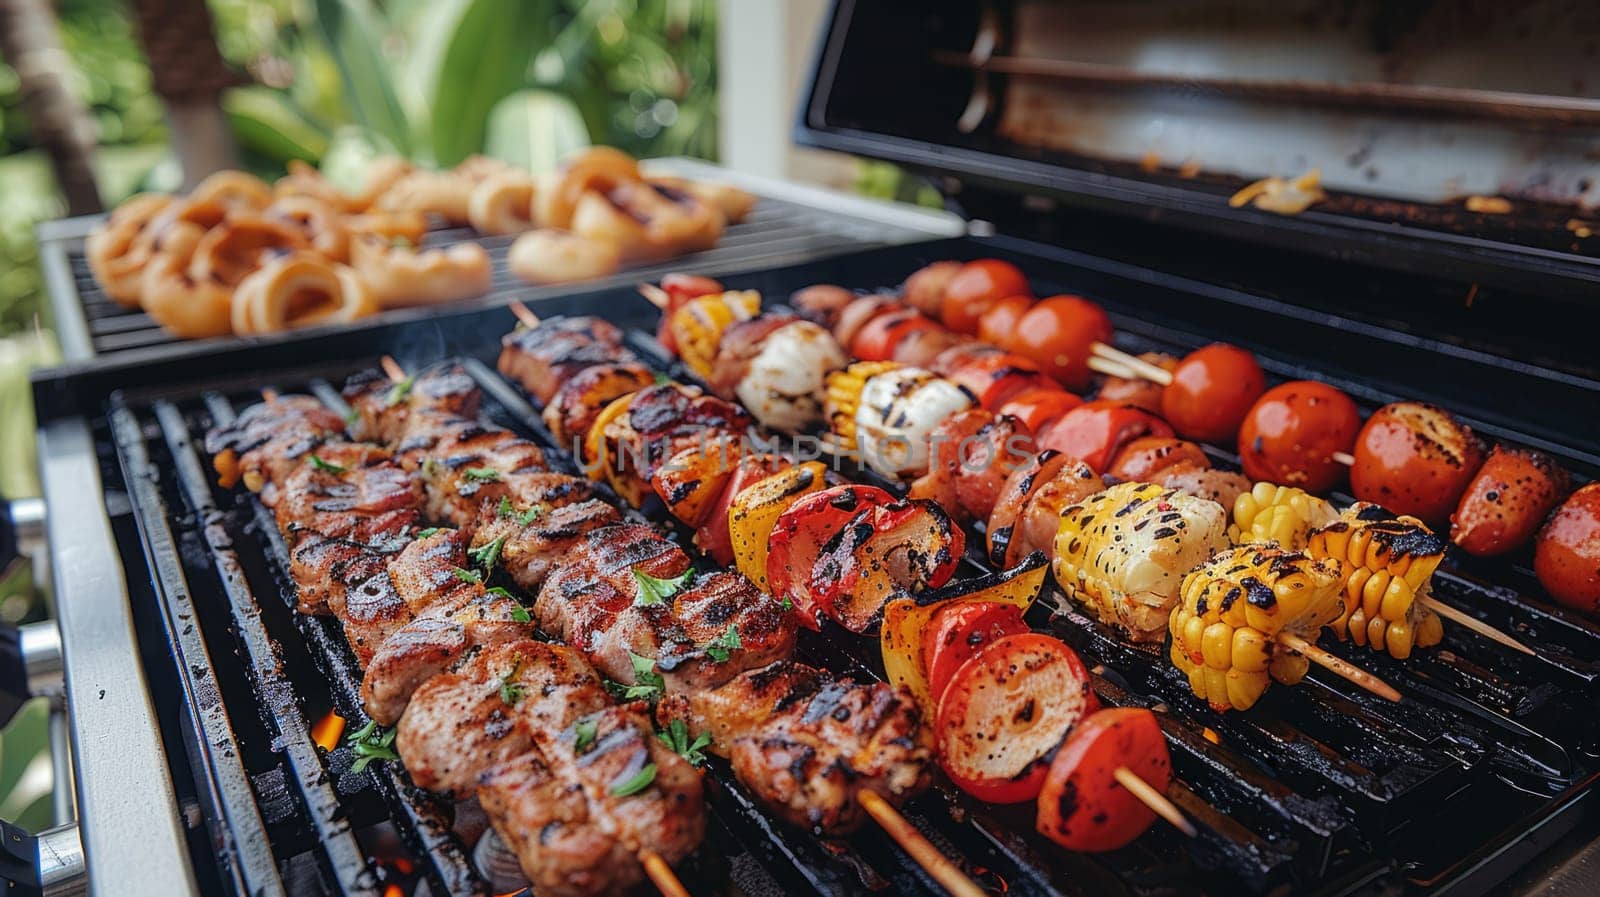 Grilled skewers on a grilled plate, outdoor.